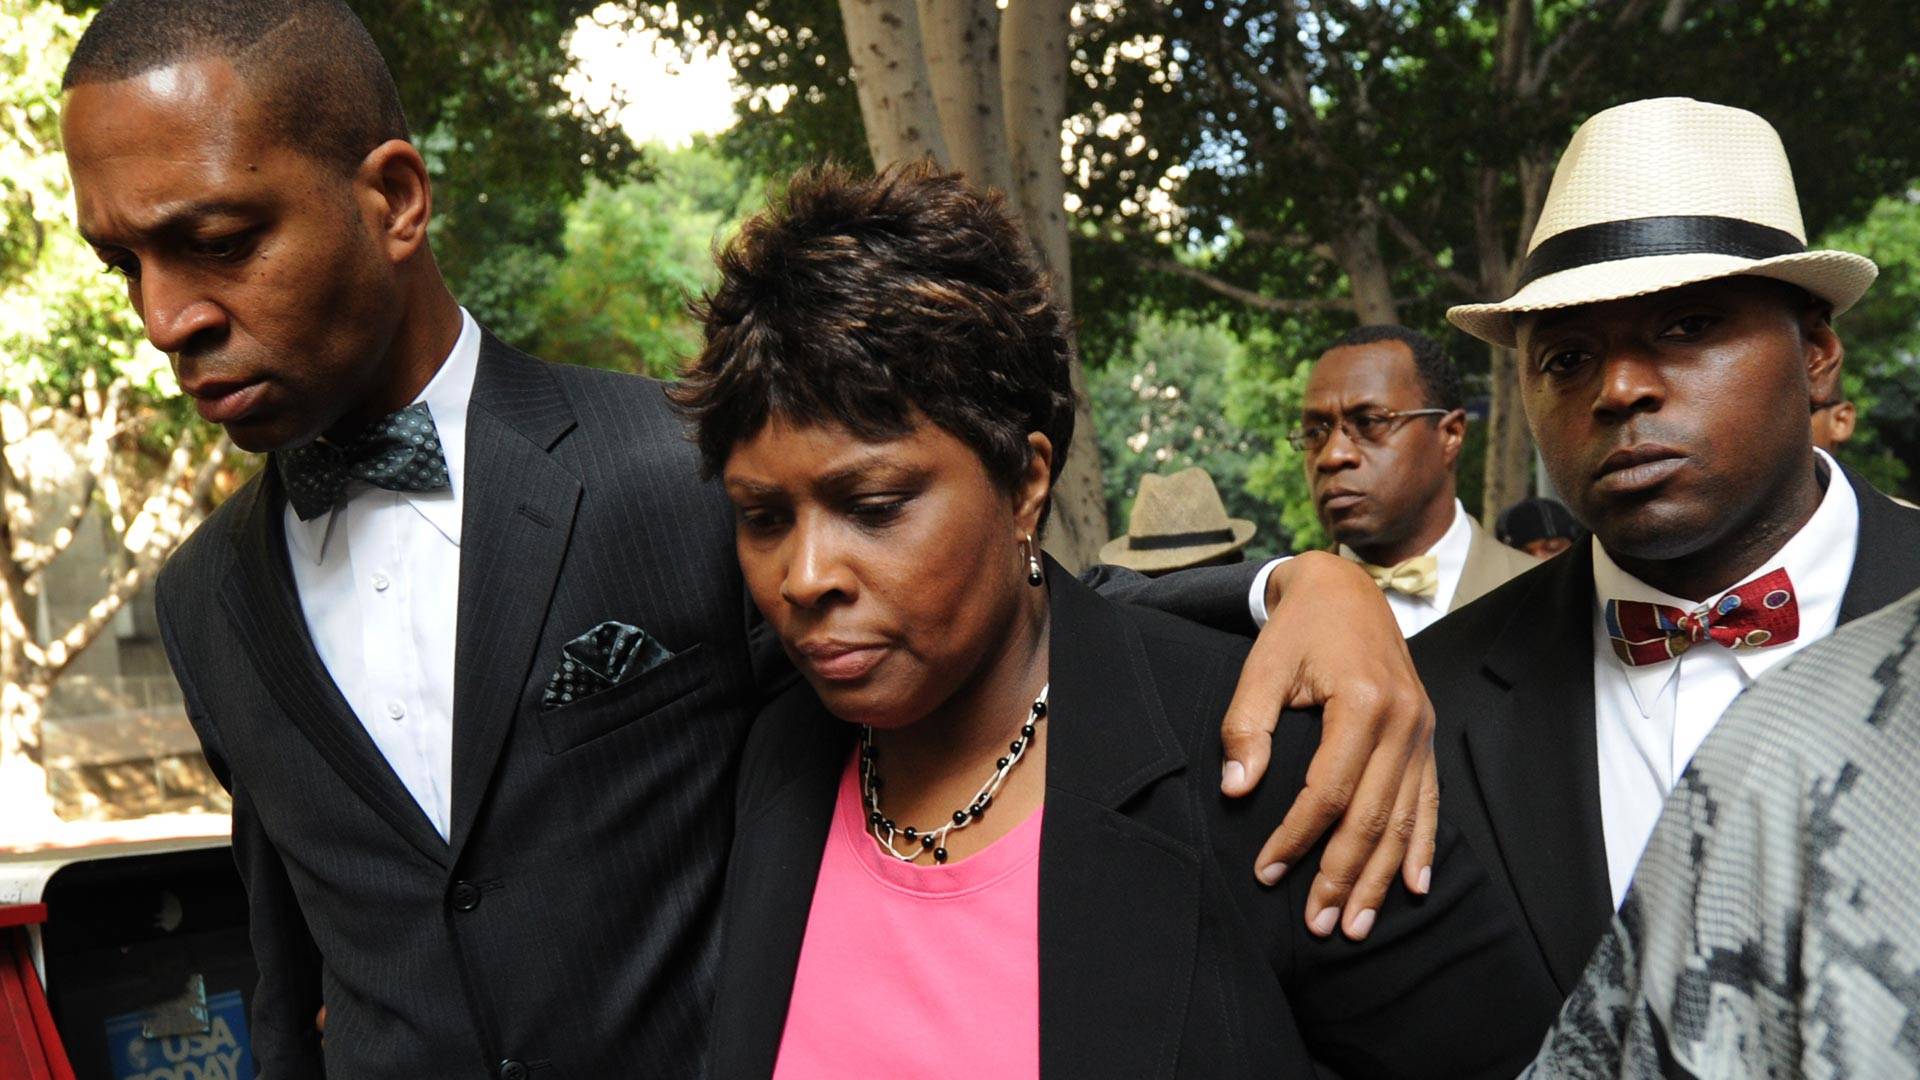 Wanda Johnson (center), the mother of Oscar J. Grant III, walks with supporters as they leave the Los Angeles Superior Court after the involuntary manslaughter verdict against former Bay Area Rapid Transit (BART) officer Johannes Mehserle, in Los Angeles on July 8, 2010. MARK RALSTON/AFP/Getty Images